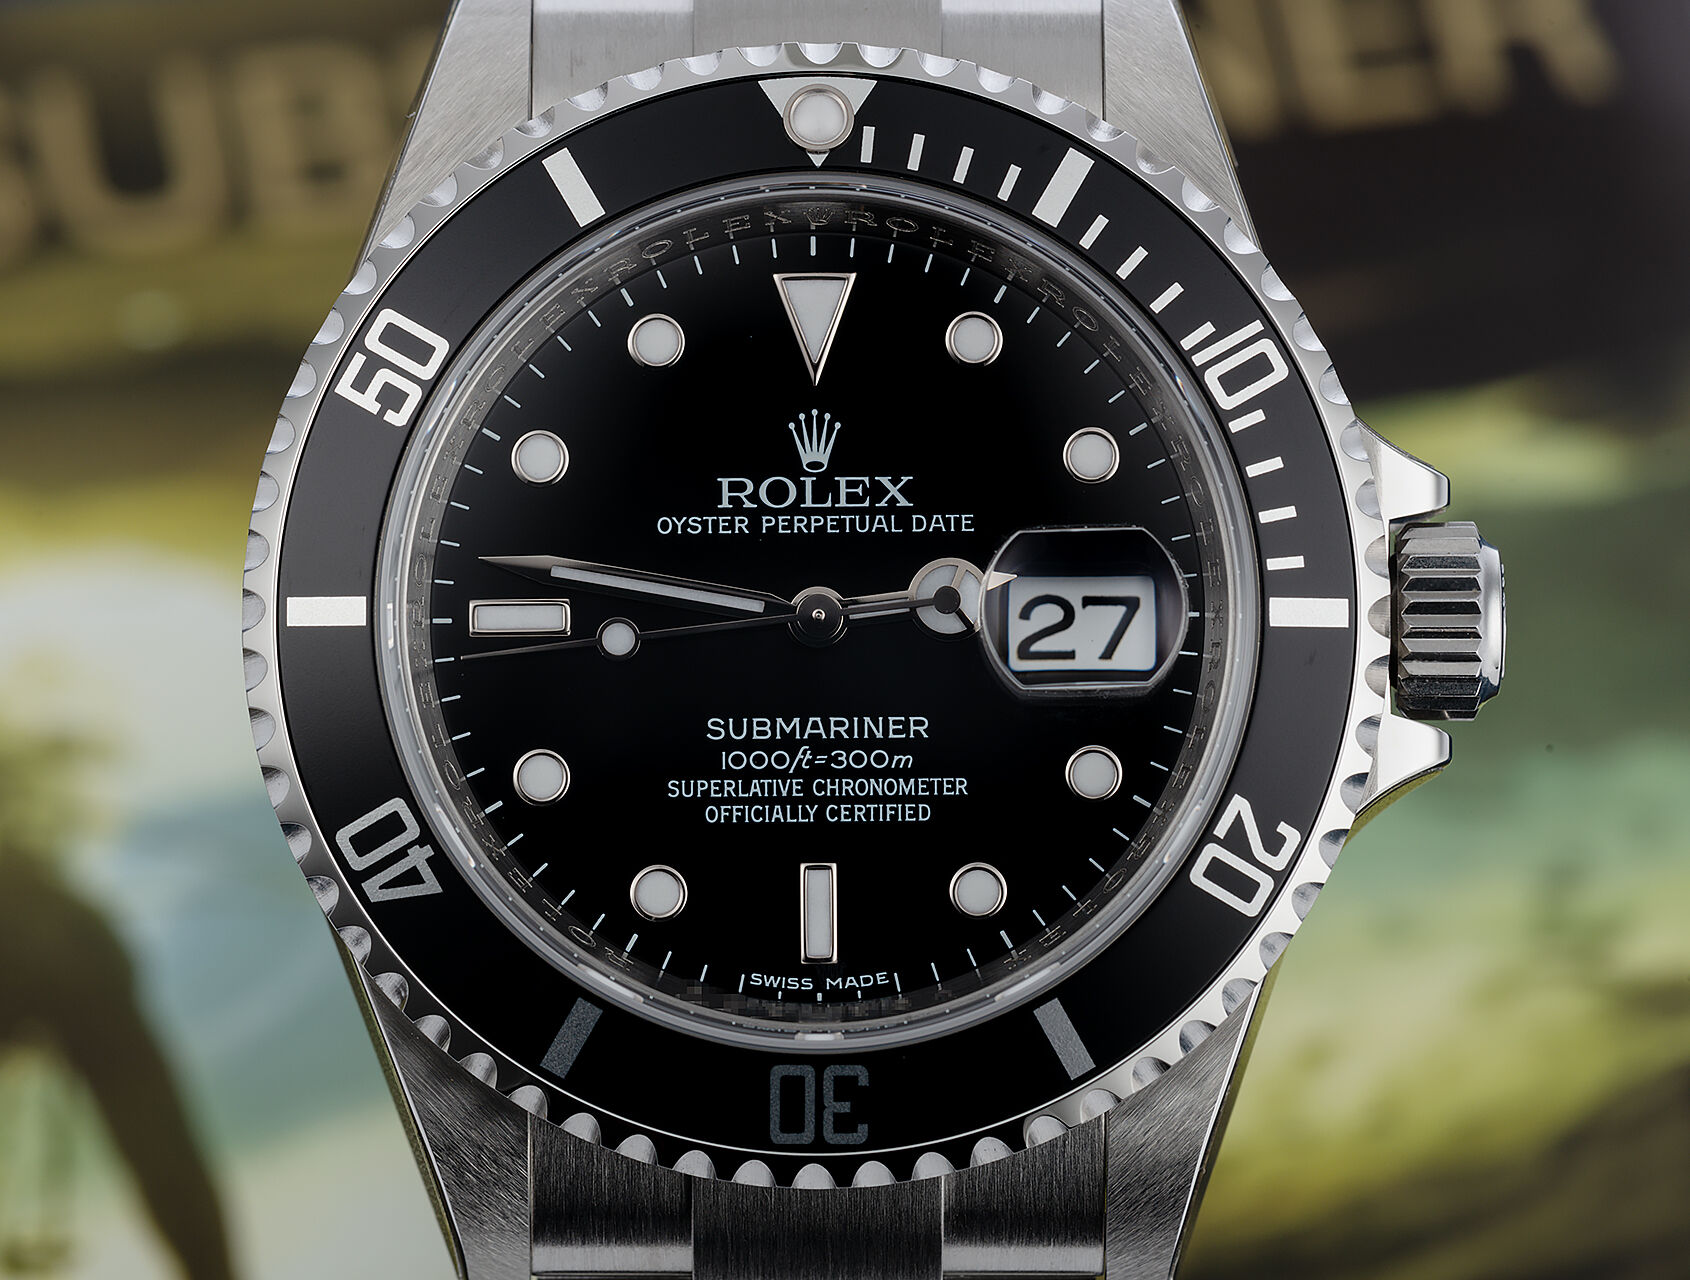 Rolex Submariner Date Reference 16610 Specs